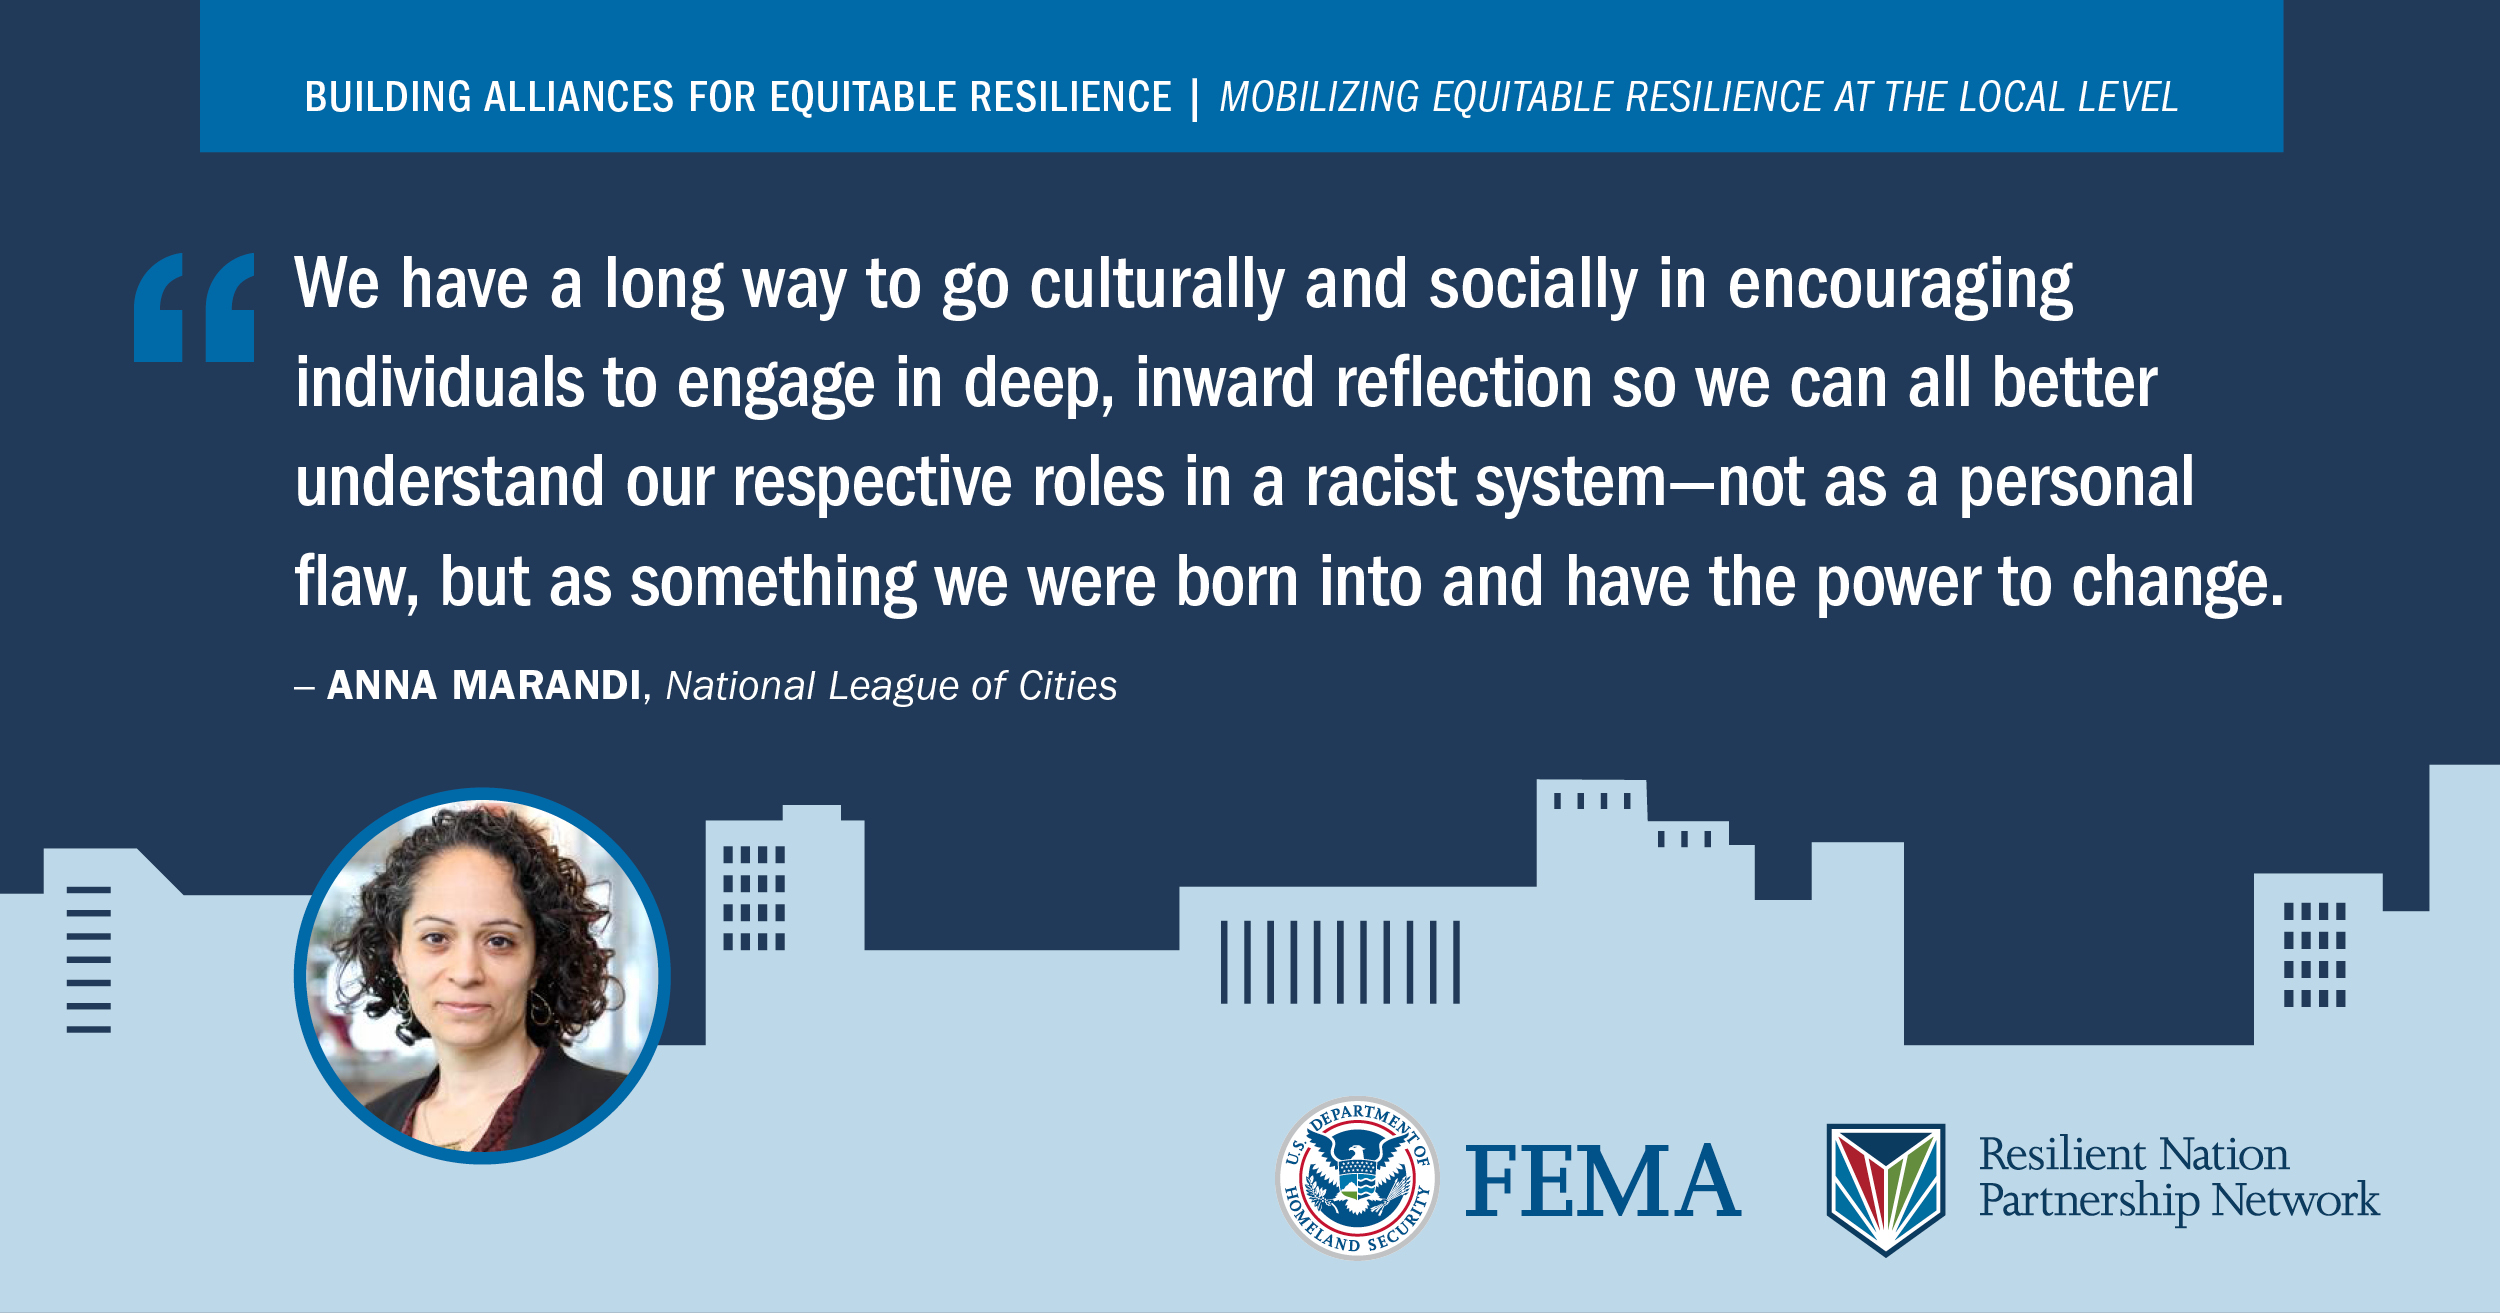 “We have a long way to go culturally and socially in encouraging individuals to engage in deep, inward reflection so we can all better understand our respective roles in a racist system – not as a personal flaw, but as something we were born into and have the power to change.” -Anna Marandi, National League of Cities